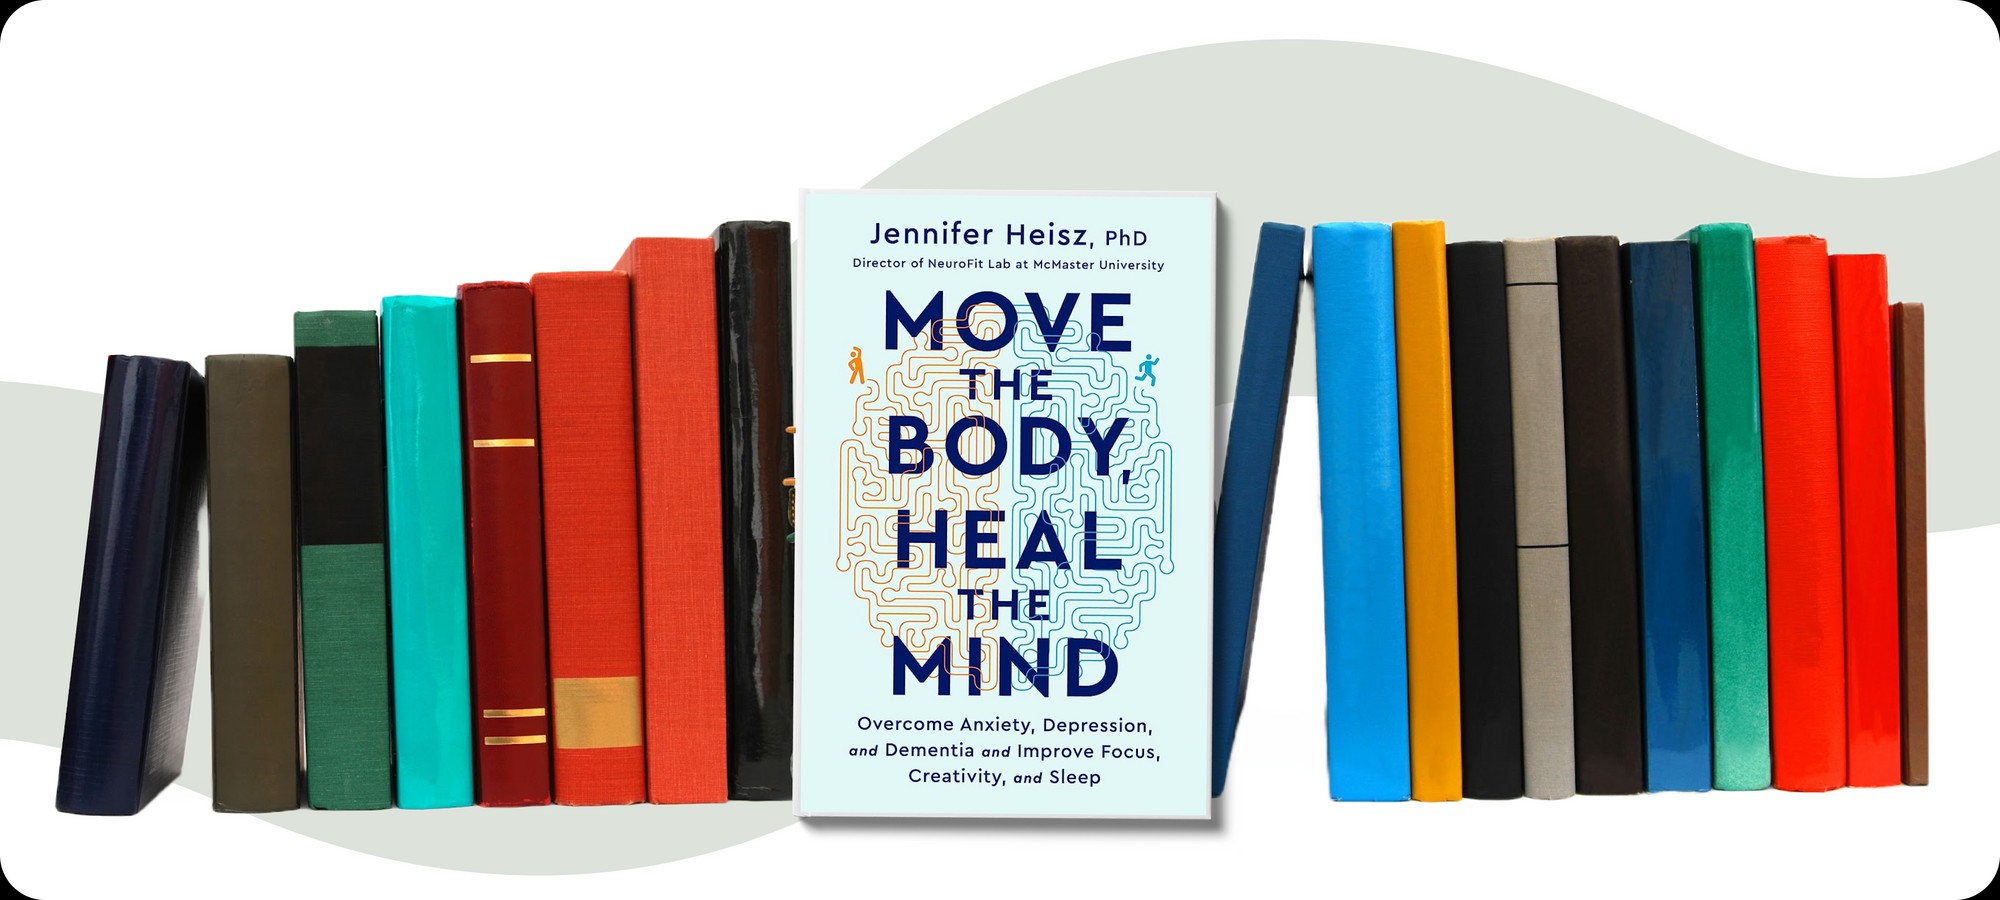 Move the Body, Heal the Mind